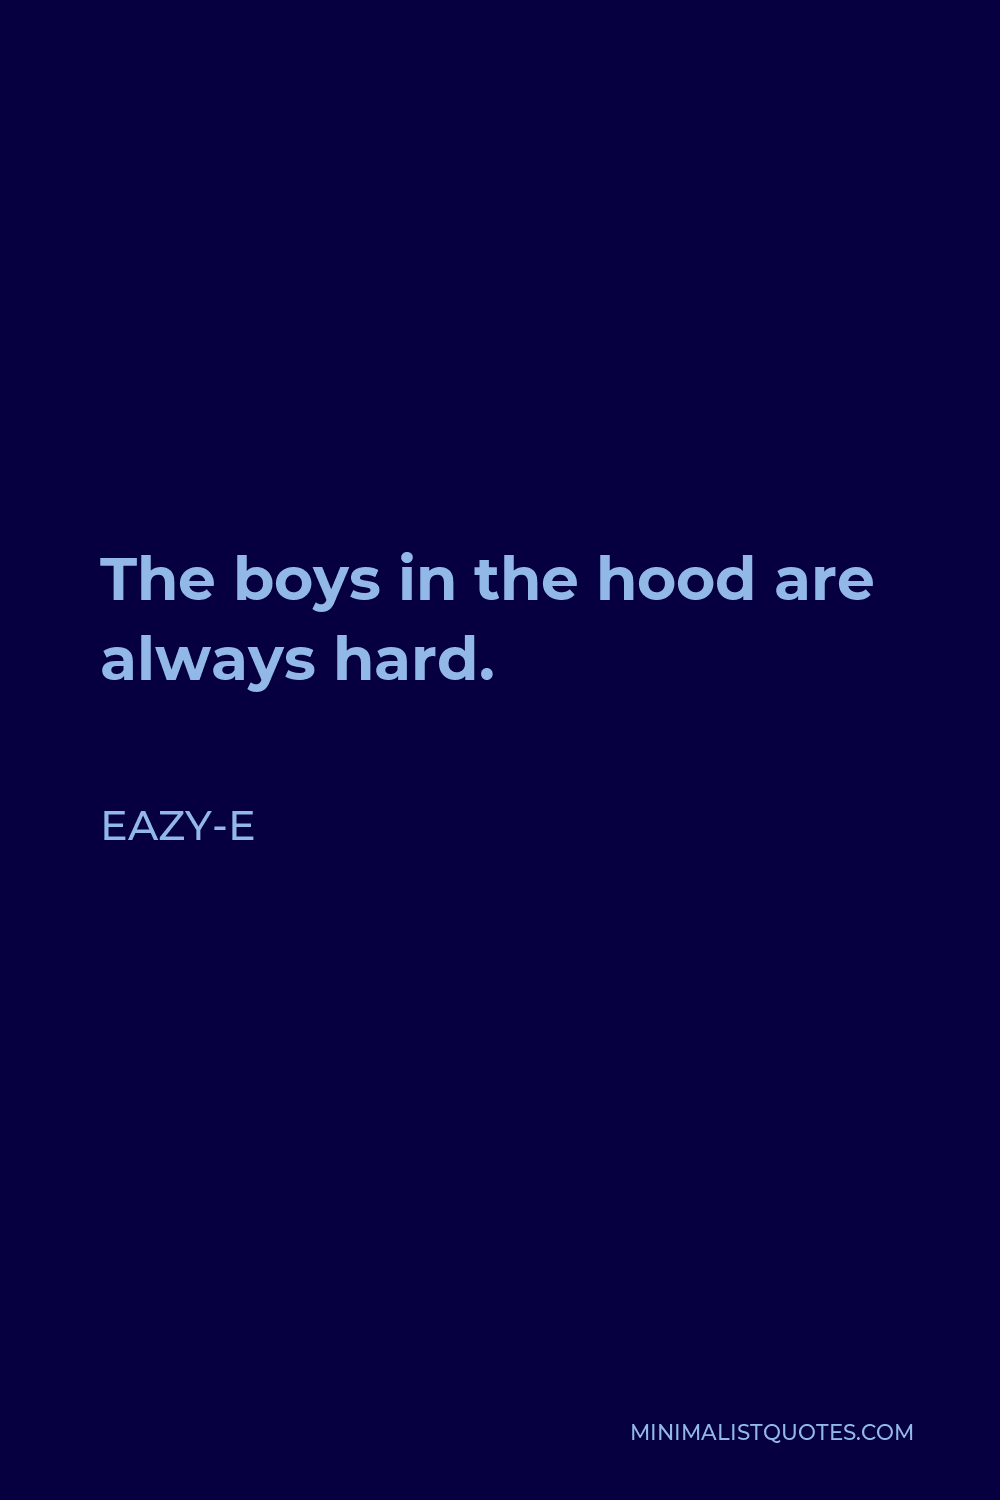 Eazy-E Quote - The boys in the hood are always hard.